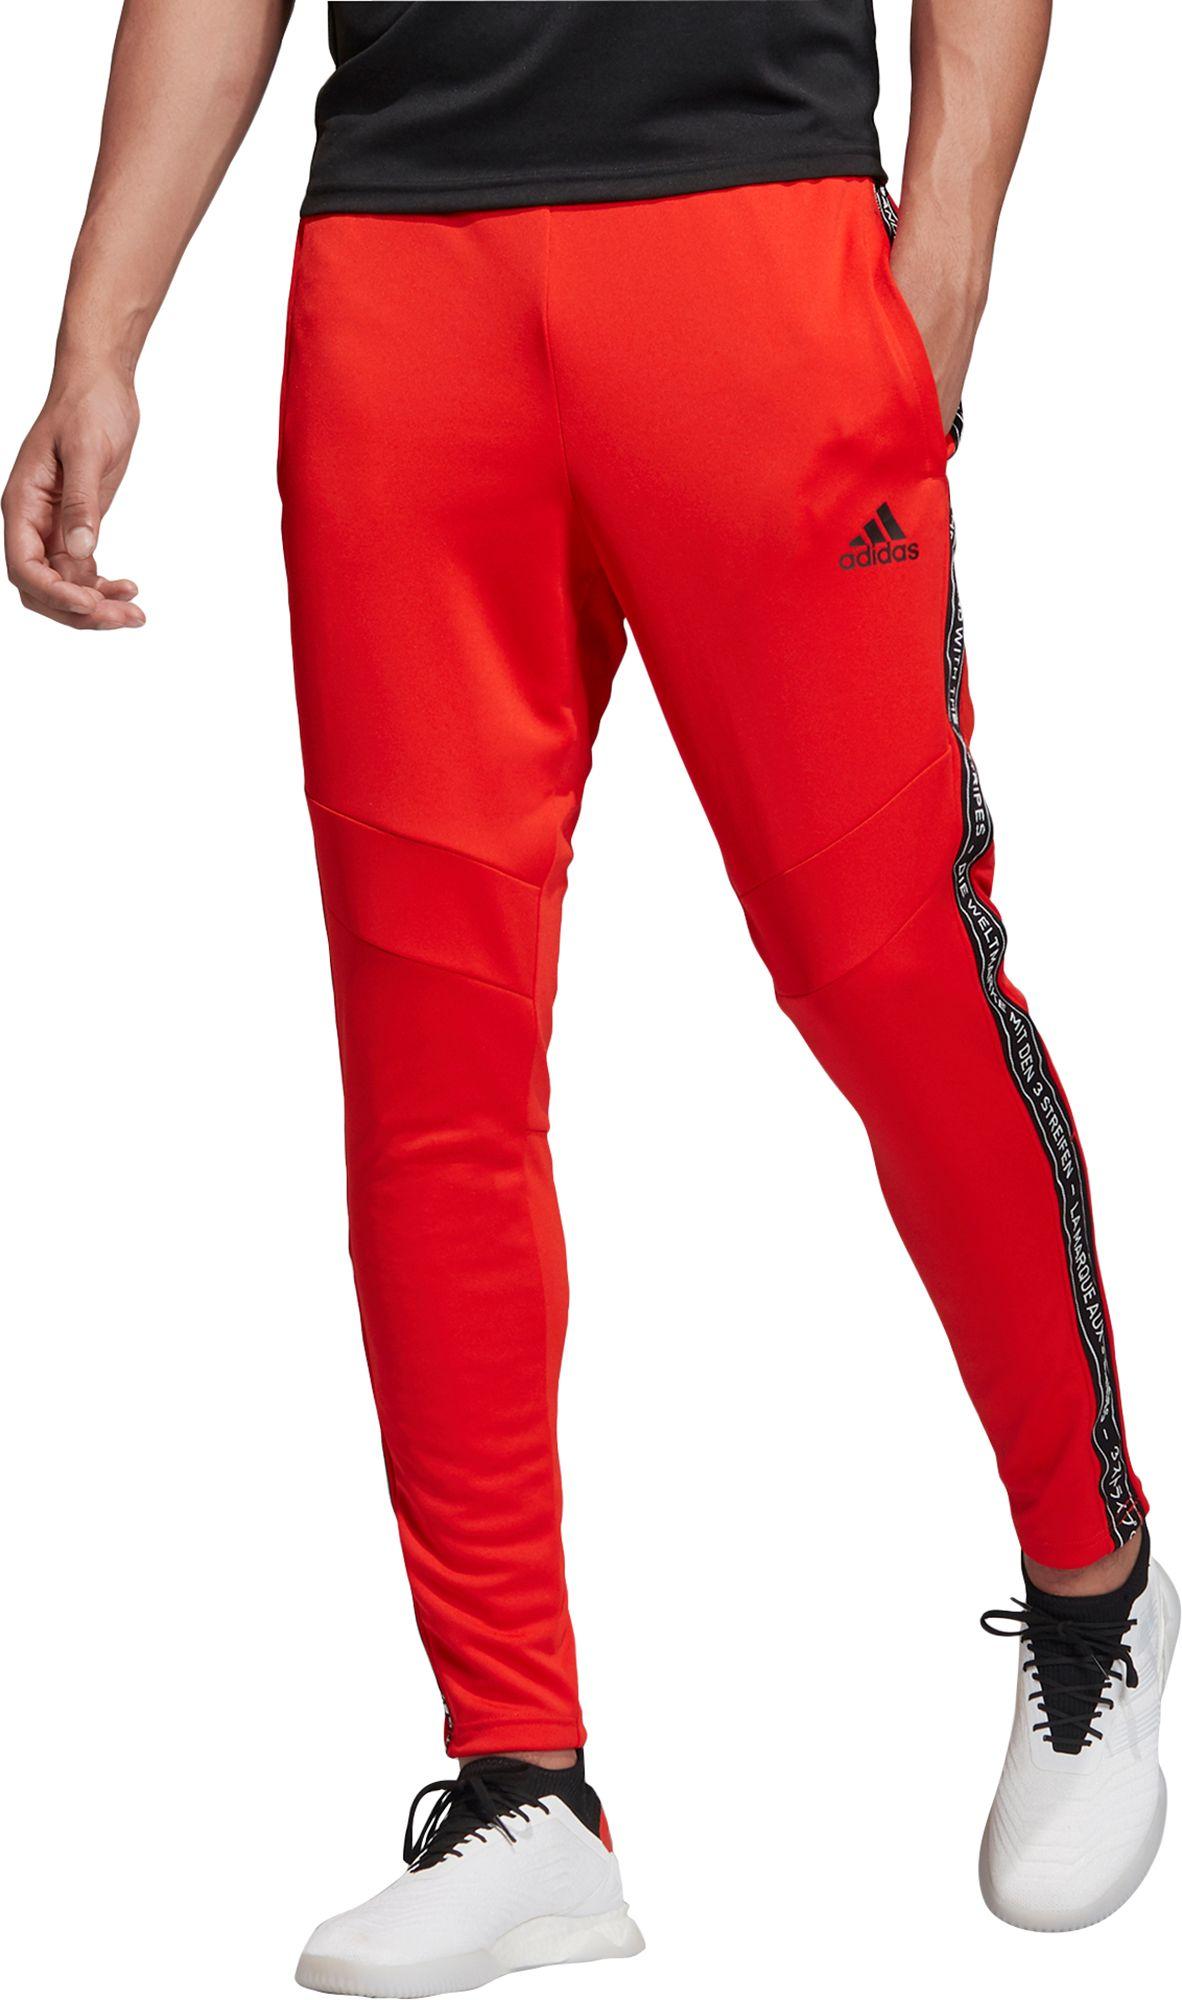 adidas Synthetic Tiro 19 Taped Training Pants in Red for Men - Lyst